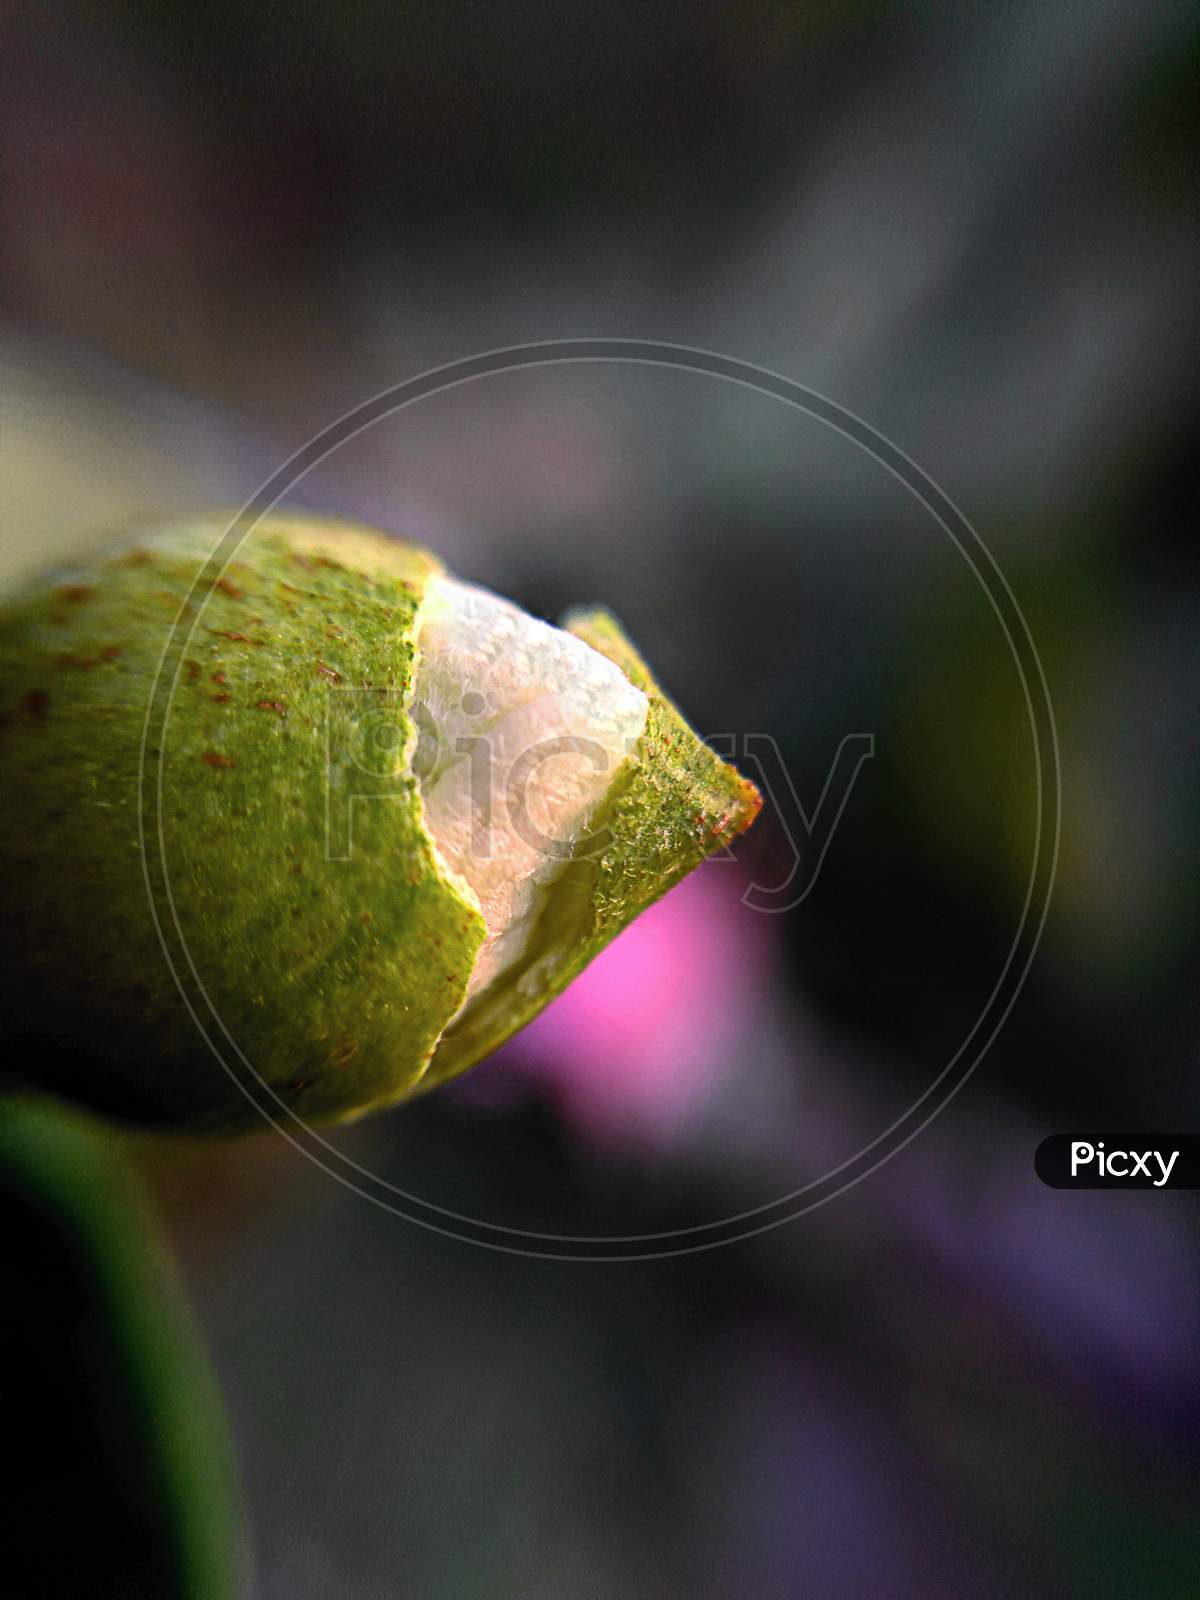 Macro Photography Of Bud Of Guava Fruit Breaking Its First Layer For Becoming A Flower.